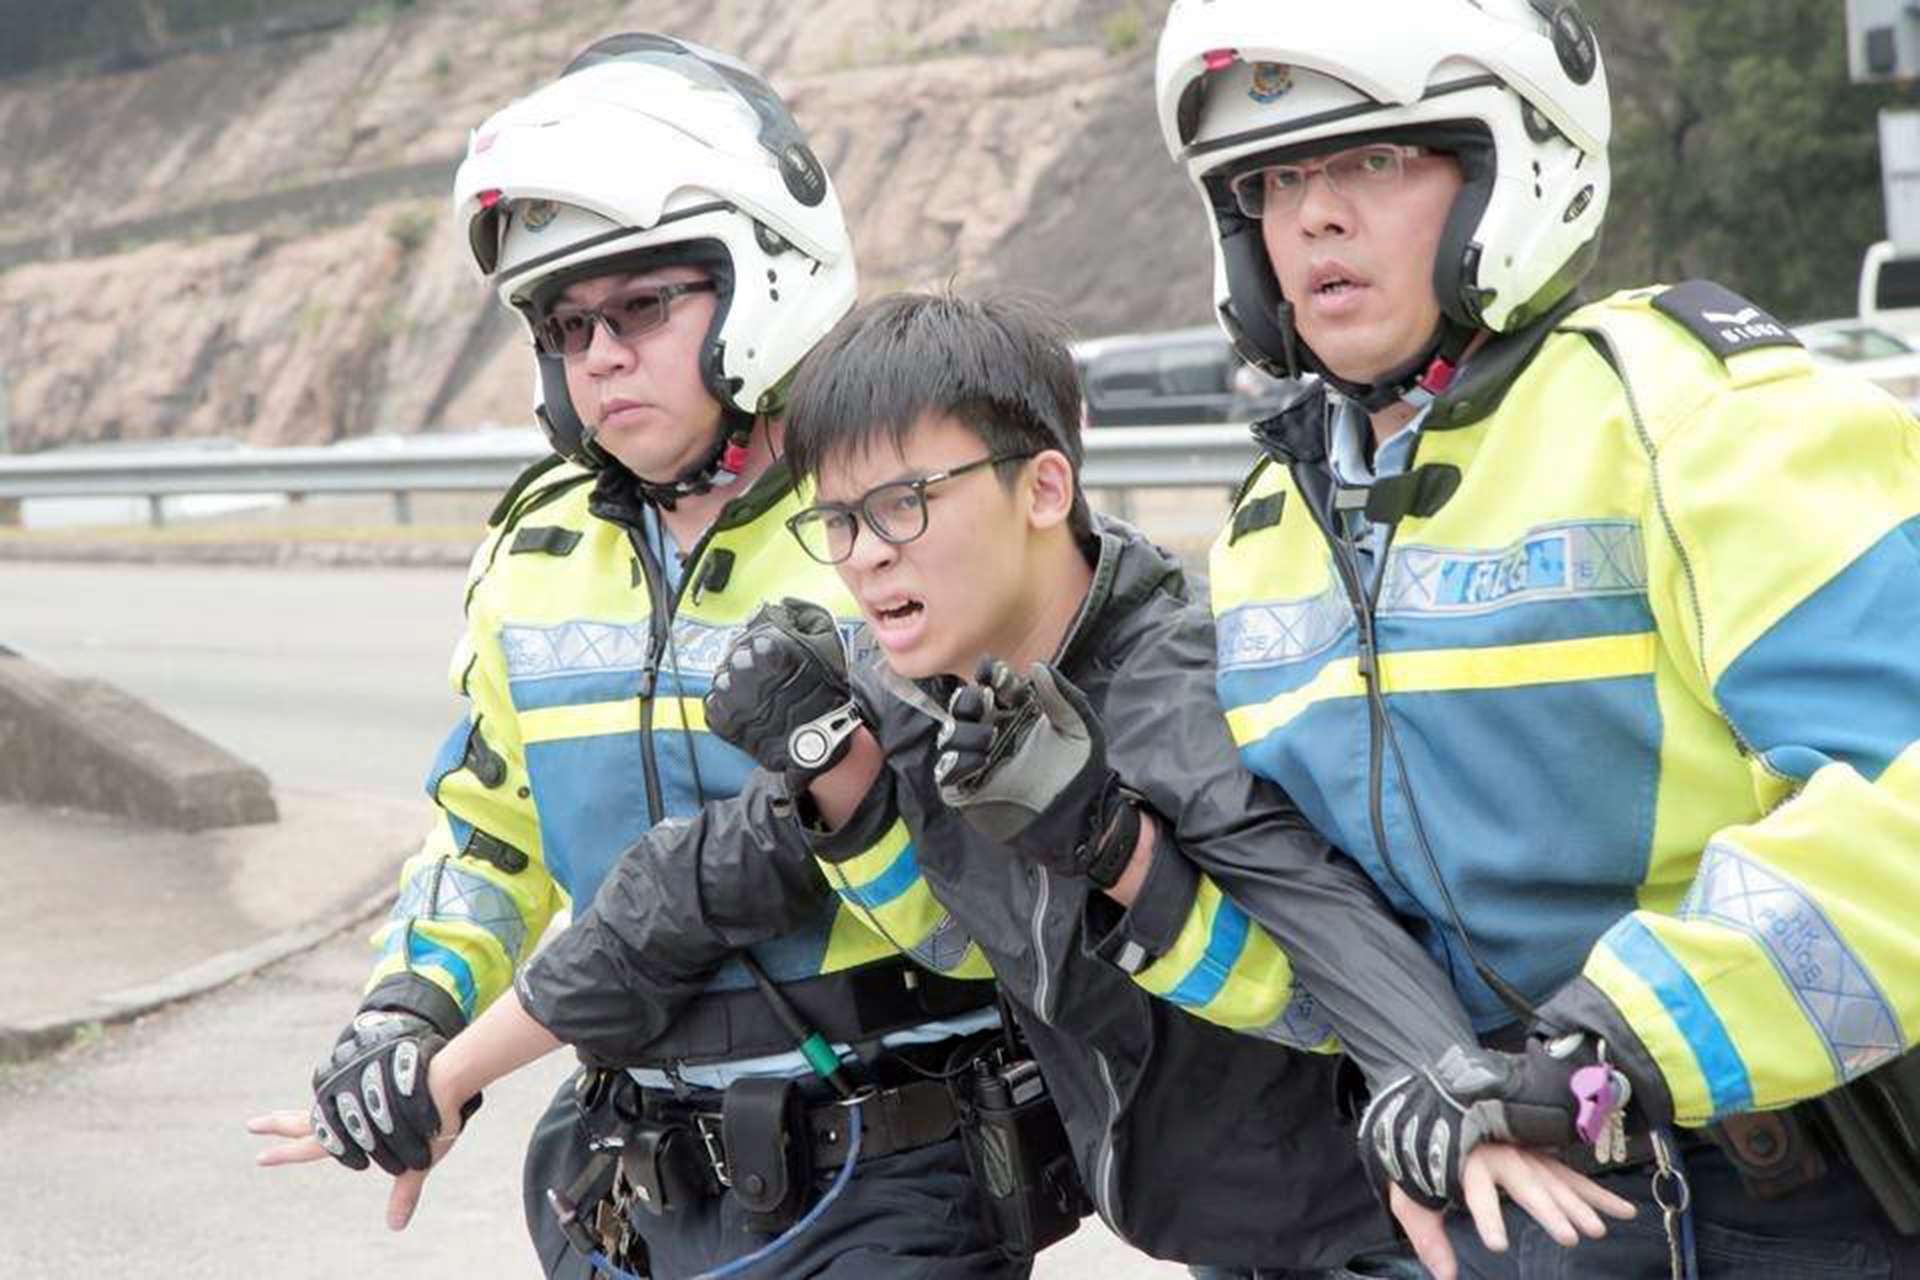 Oscar Lai was taken away from the highway by police officers. Photo: SCMP Pictures